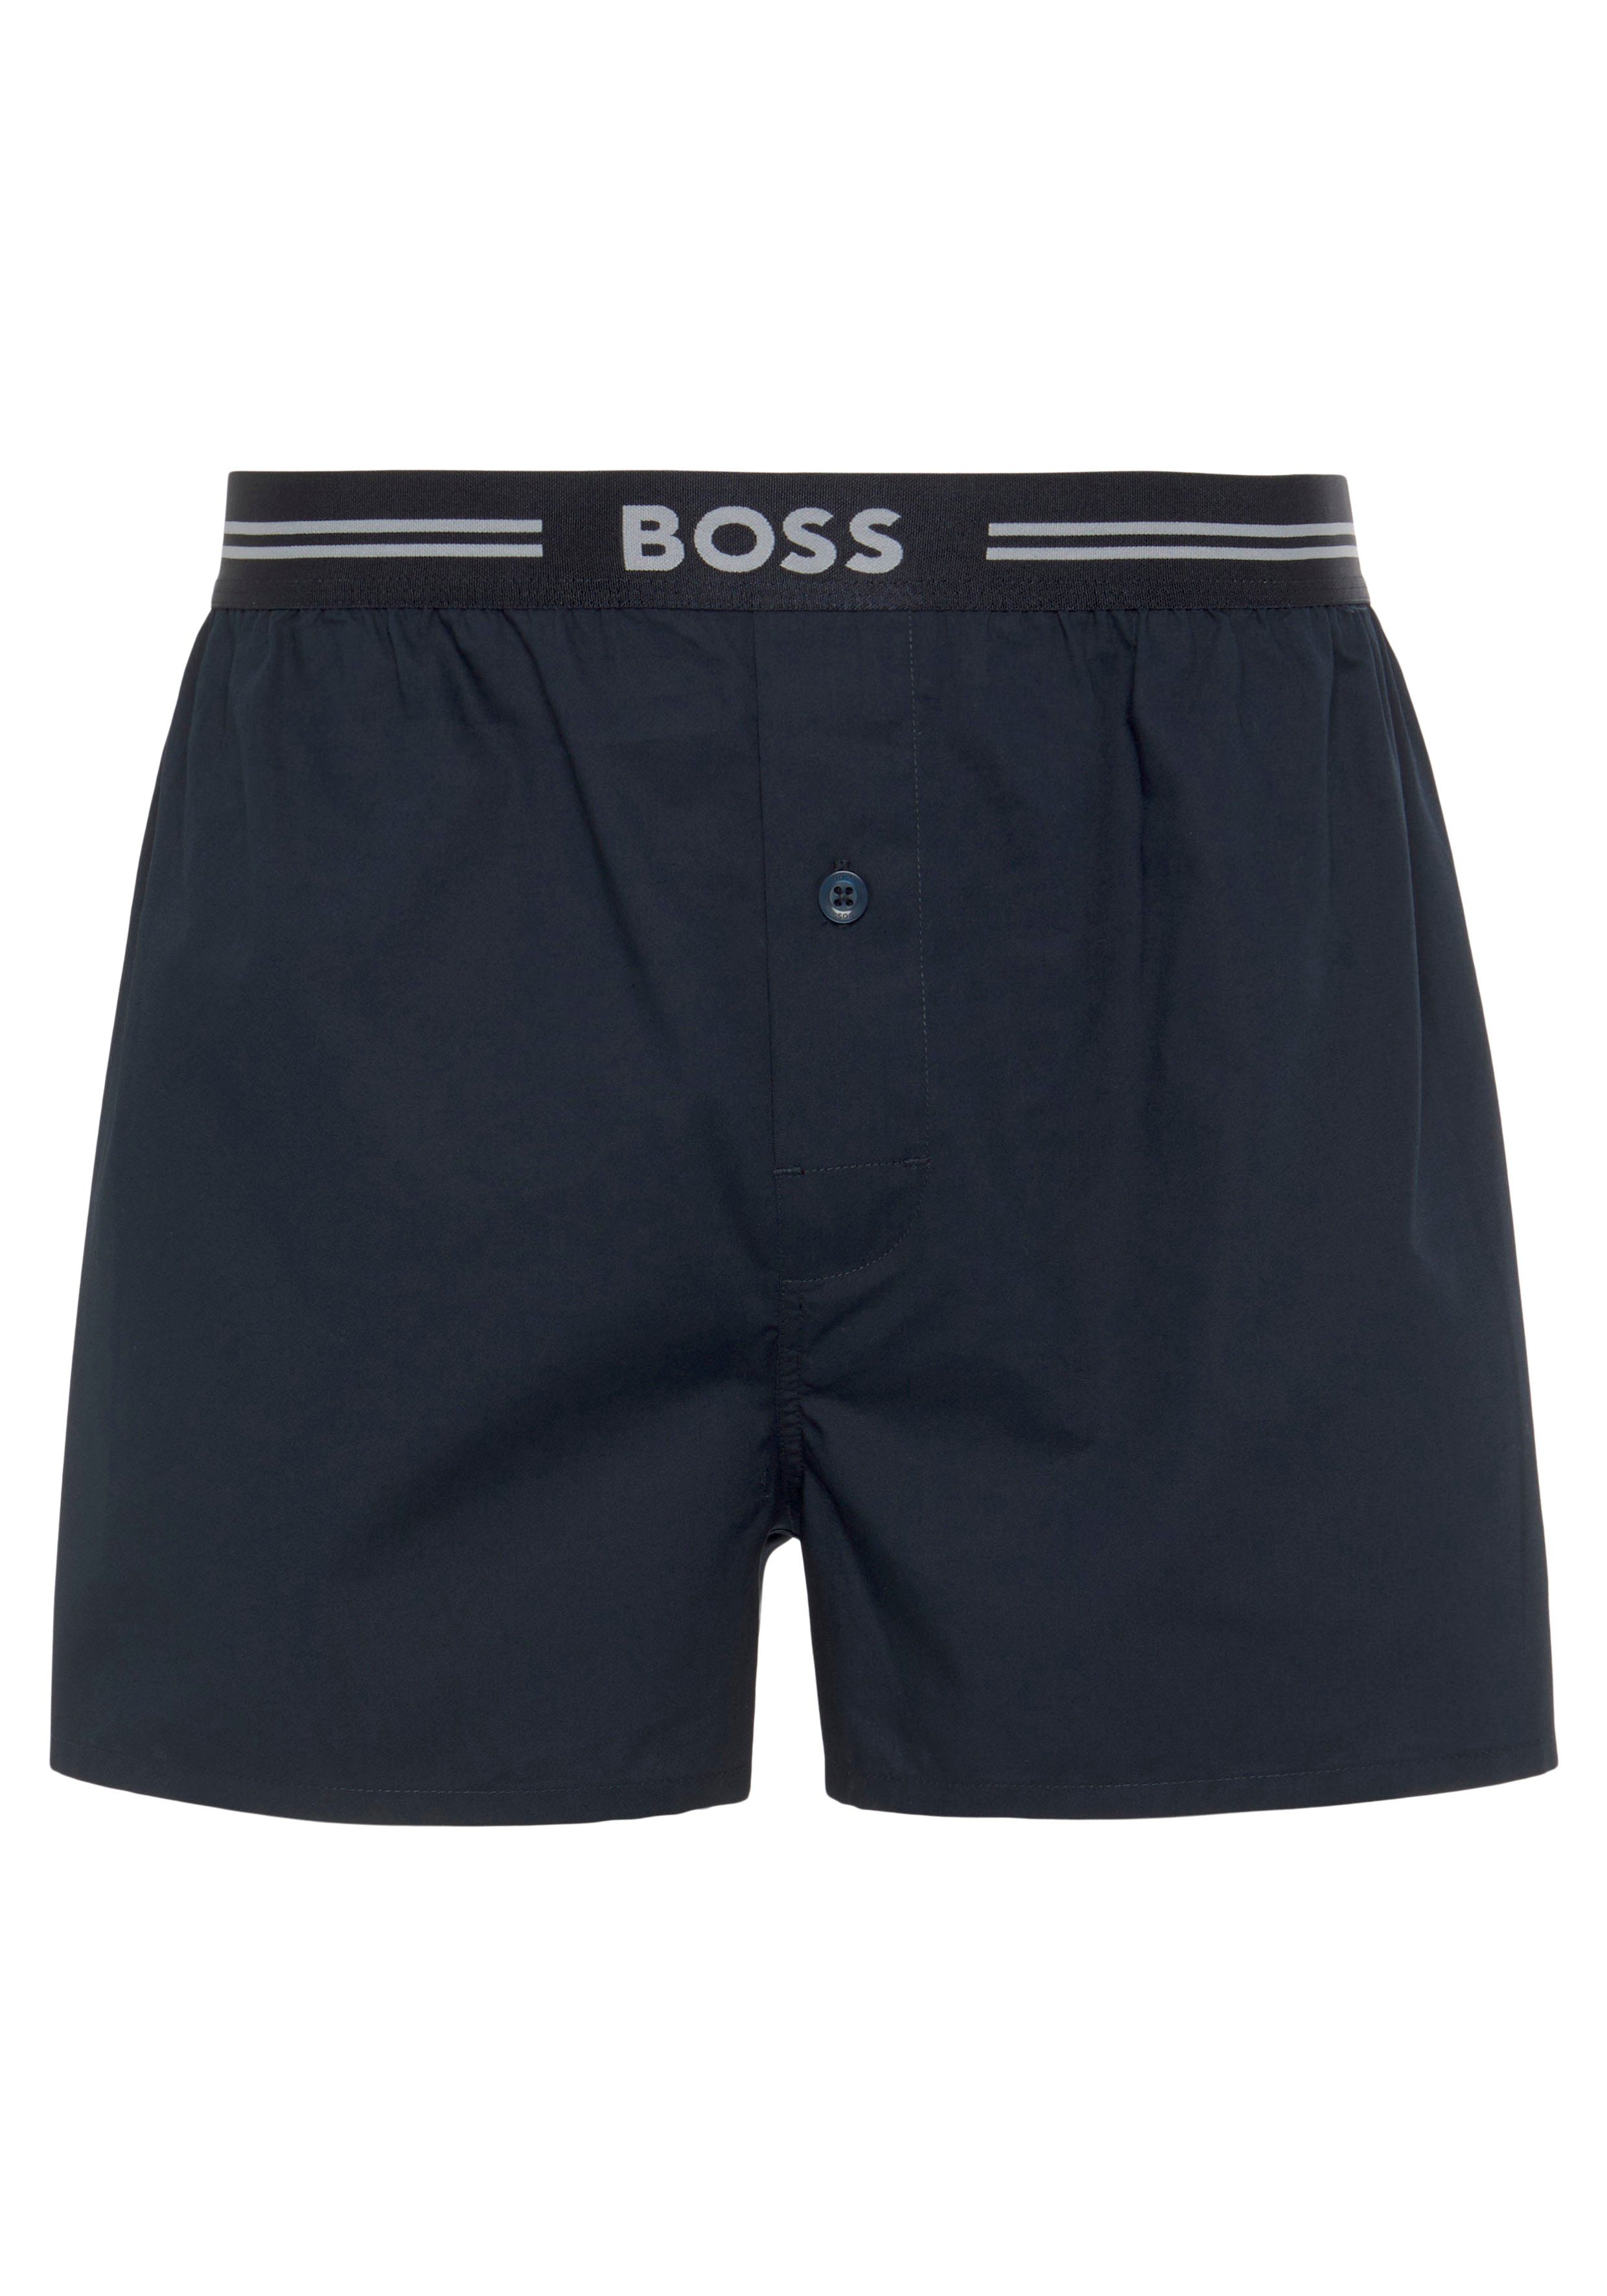 3er Woven mit Pack) Open-Blue Knopf 3P Boxer Boxershorts BOSS 3-St., Eingriff mit (Packung,